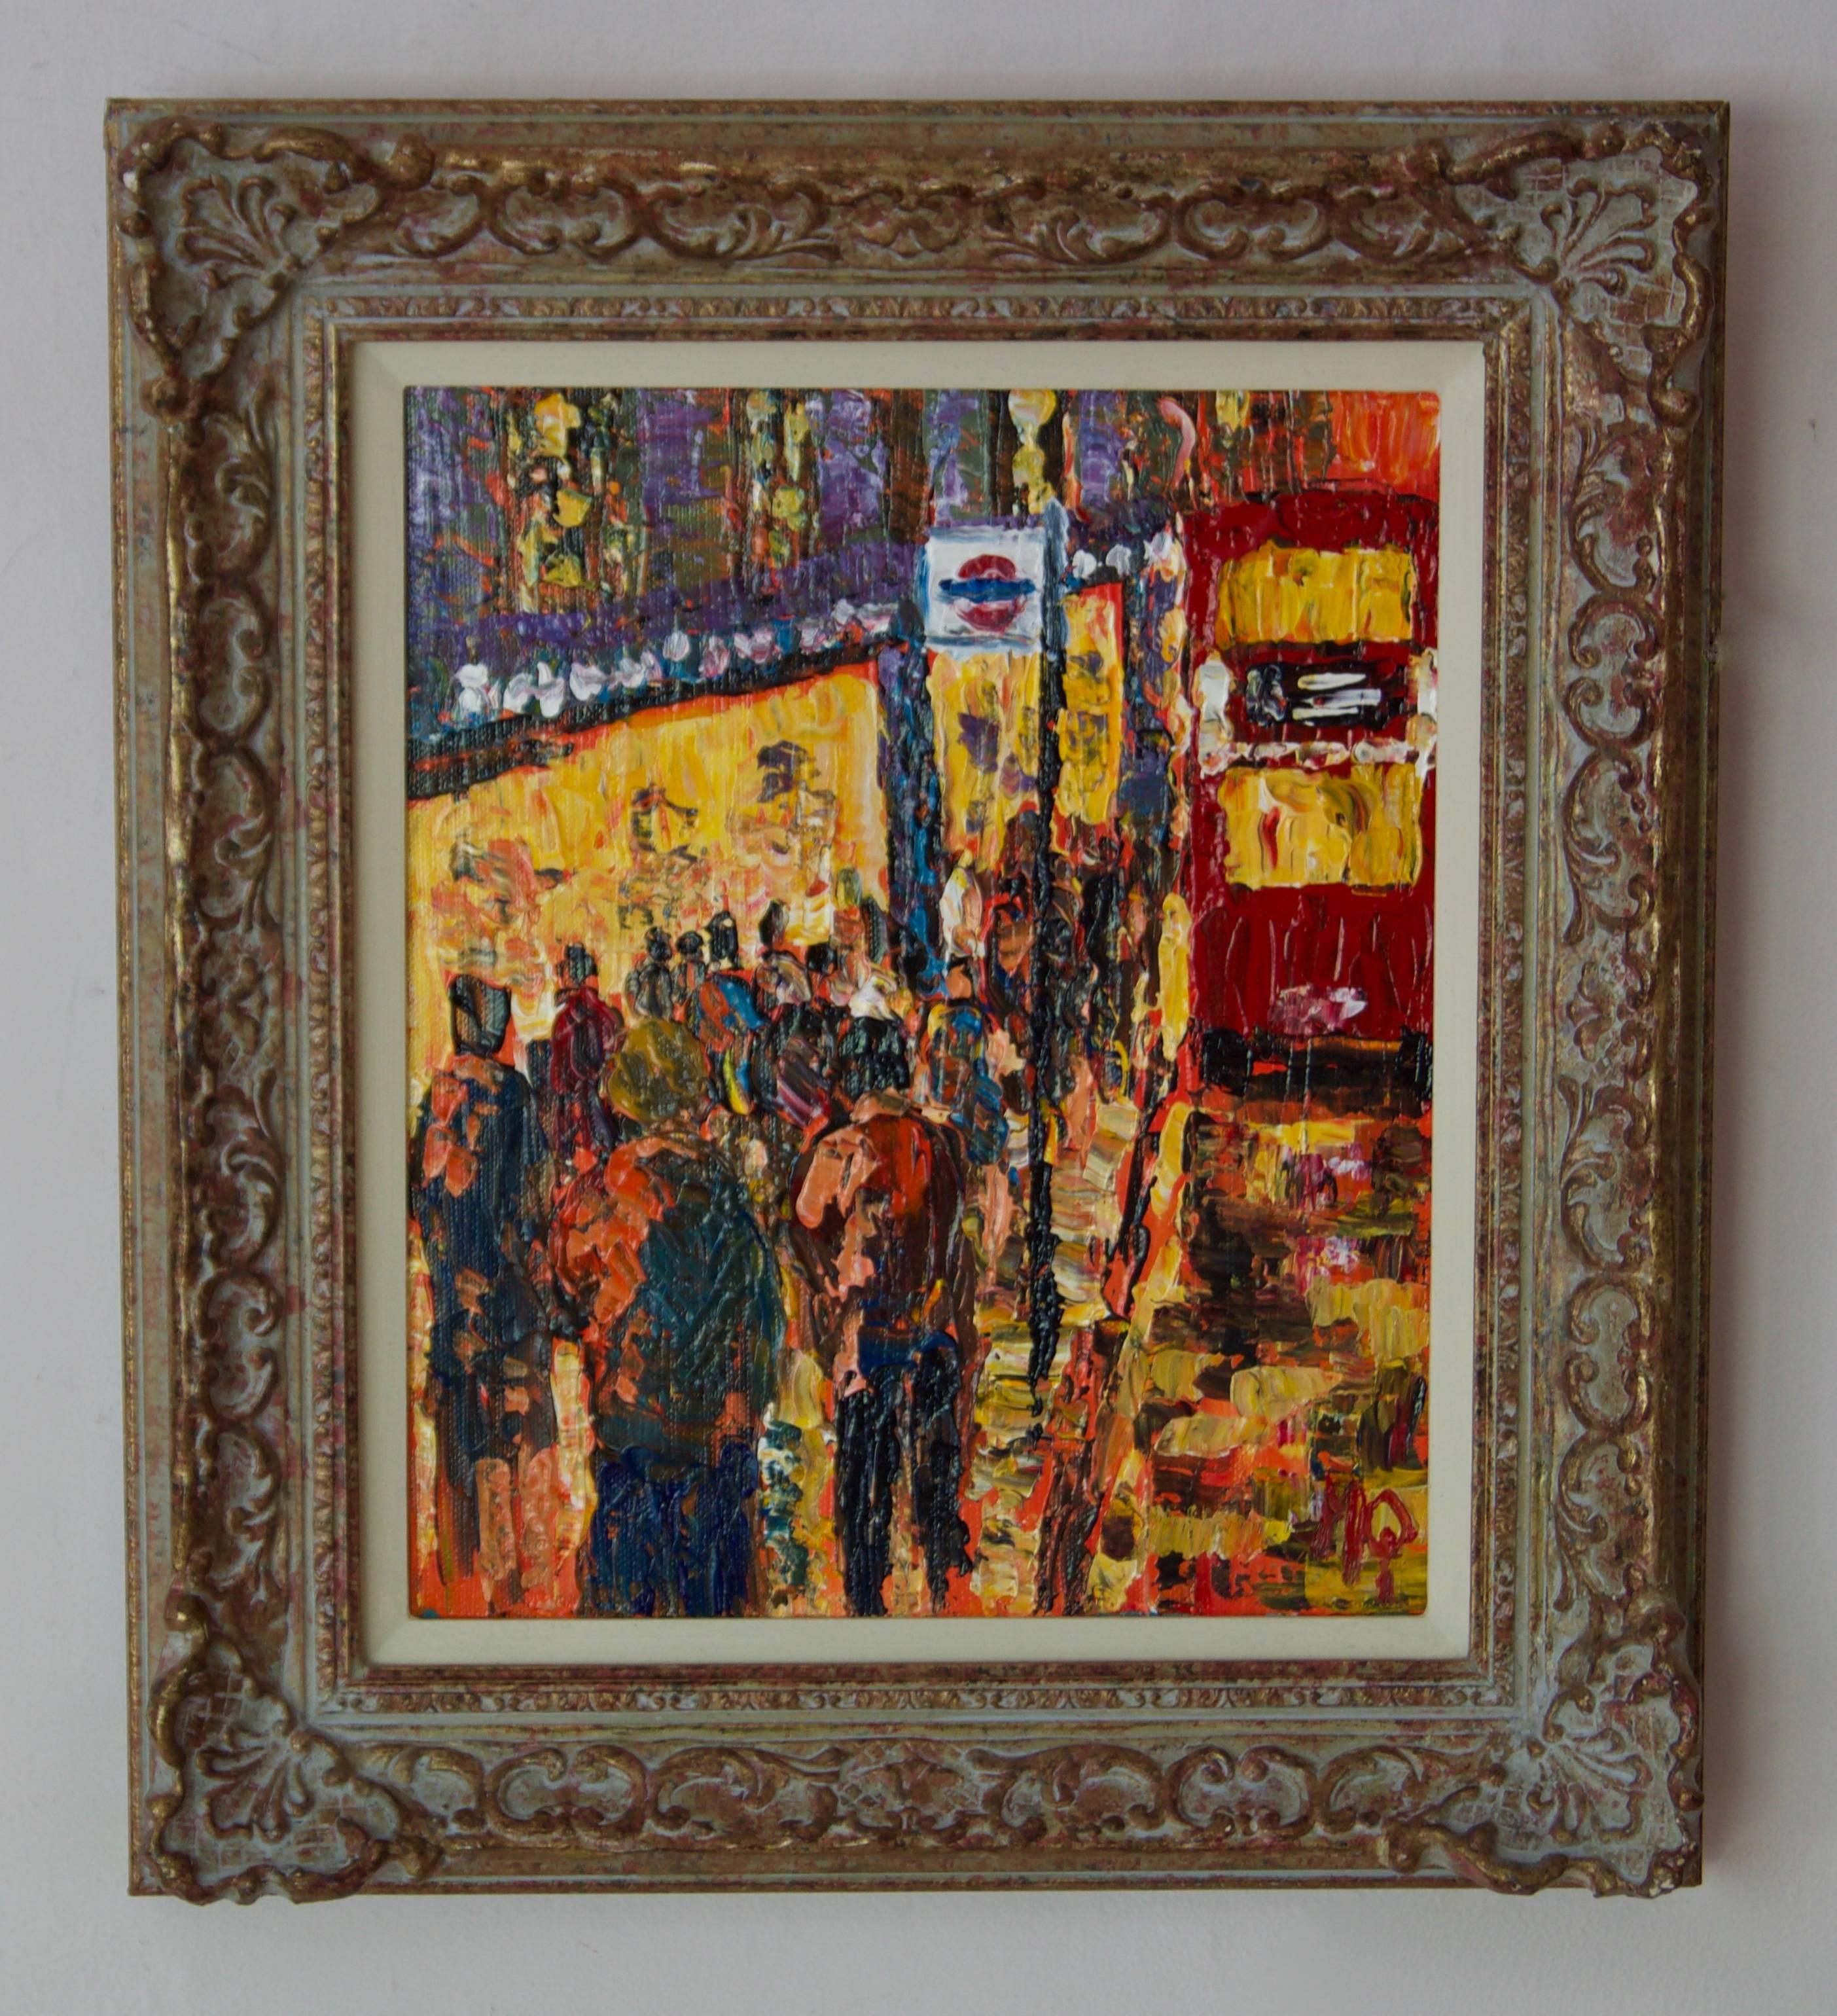 London High Street - Late 20th Century Impressionist Acrylic of Bus Stop Quirke - Painting by Michael Quirke